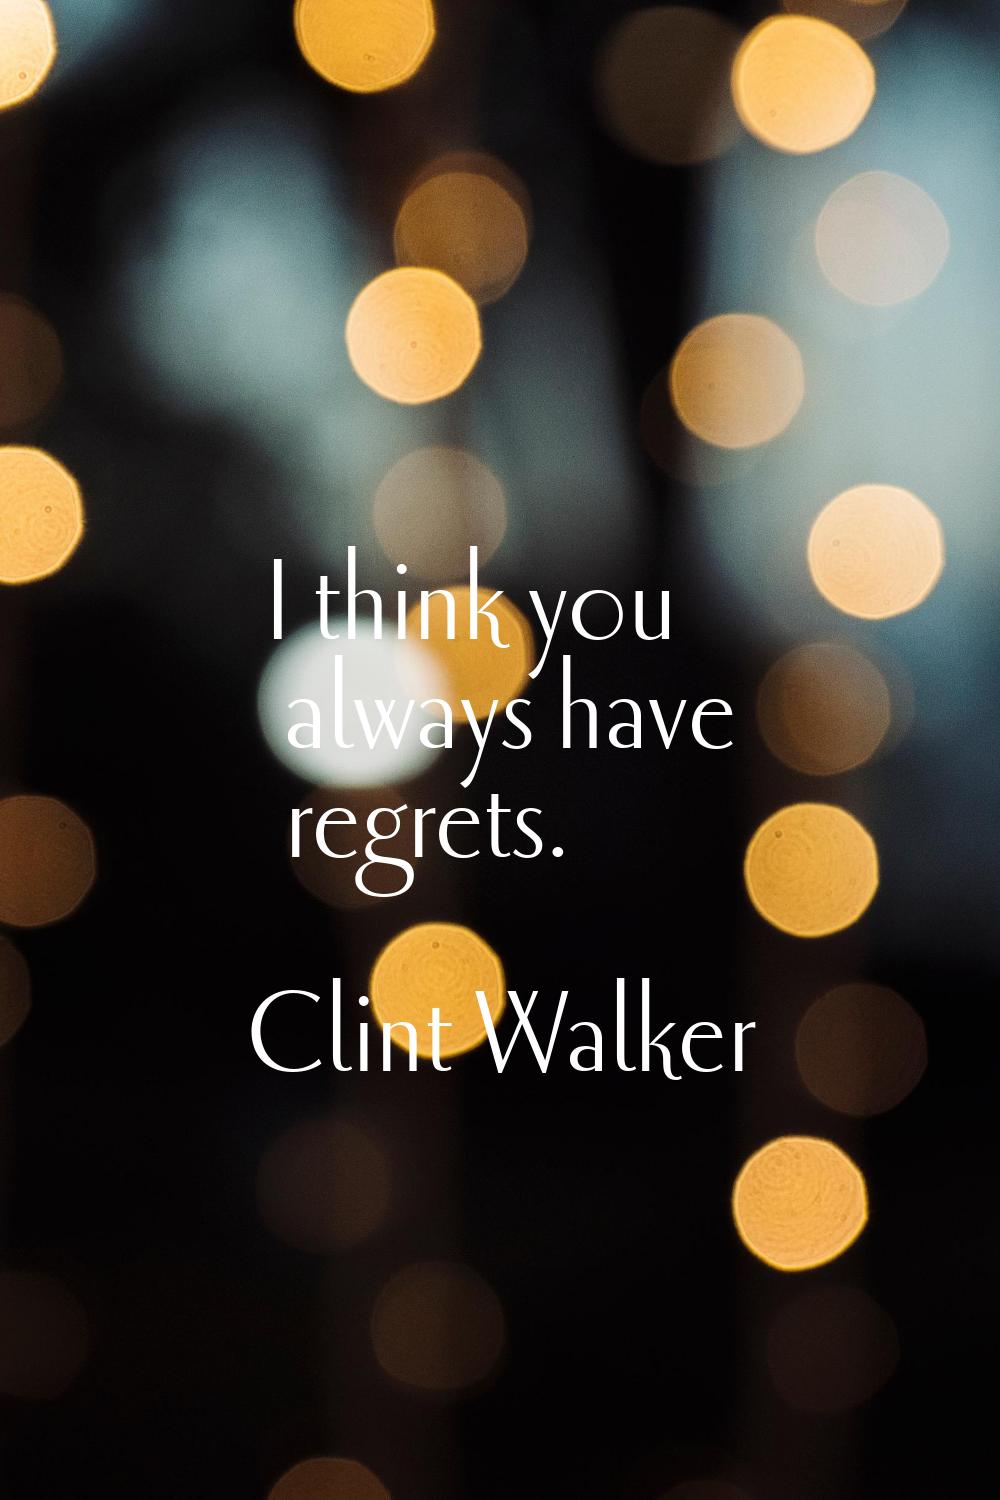 I think you always have regrets.